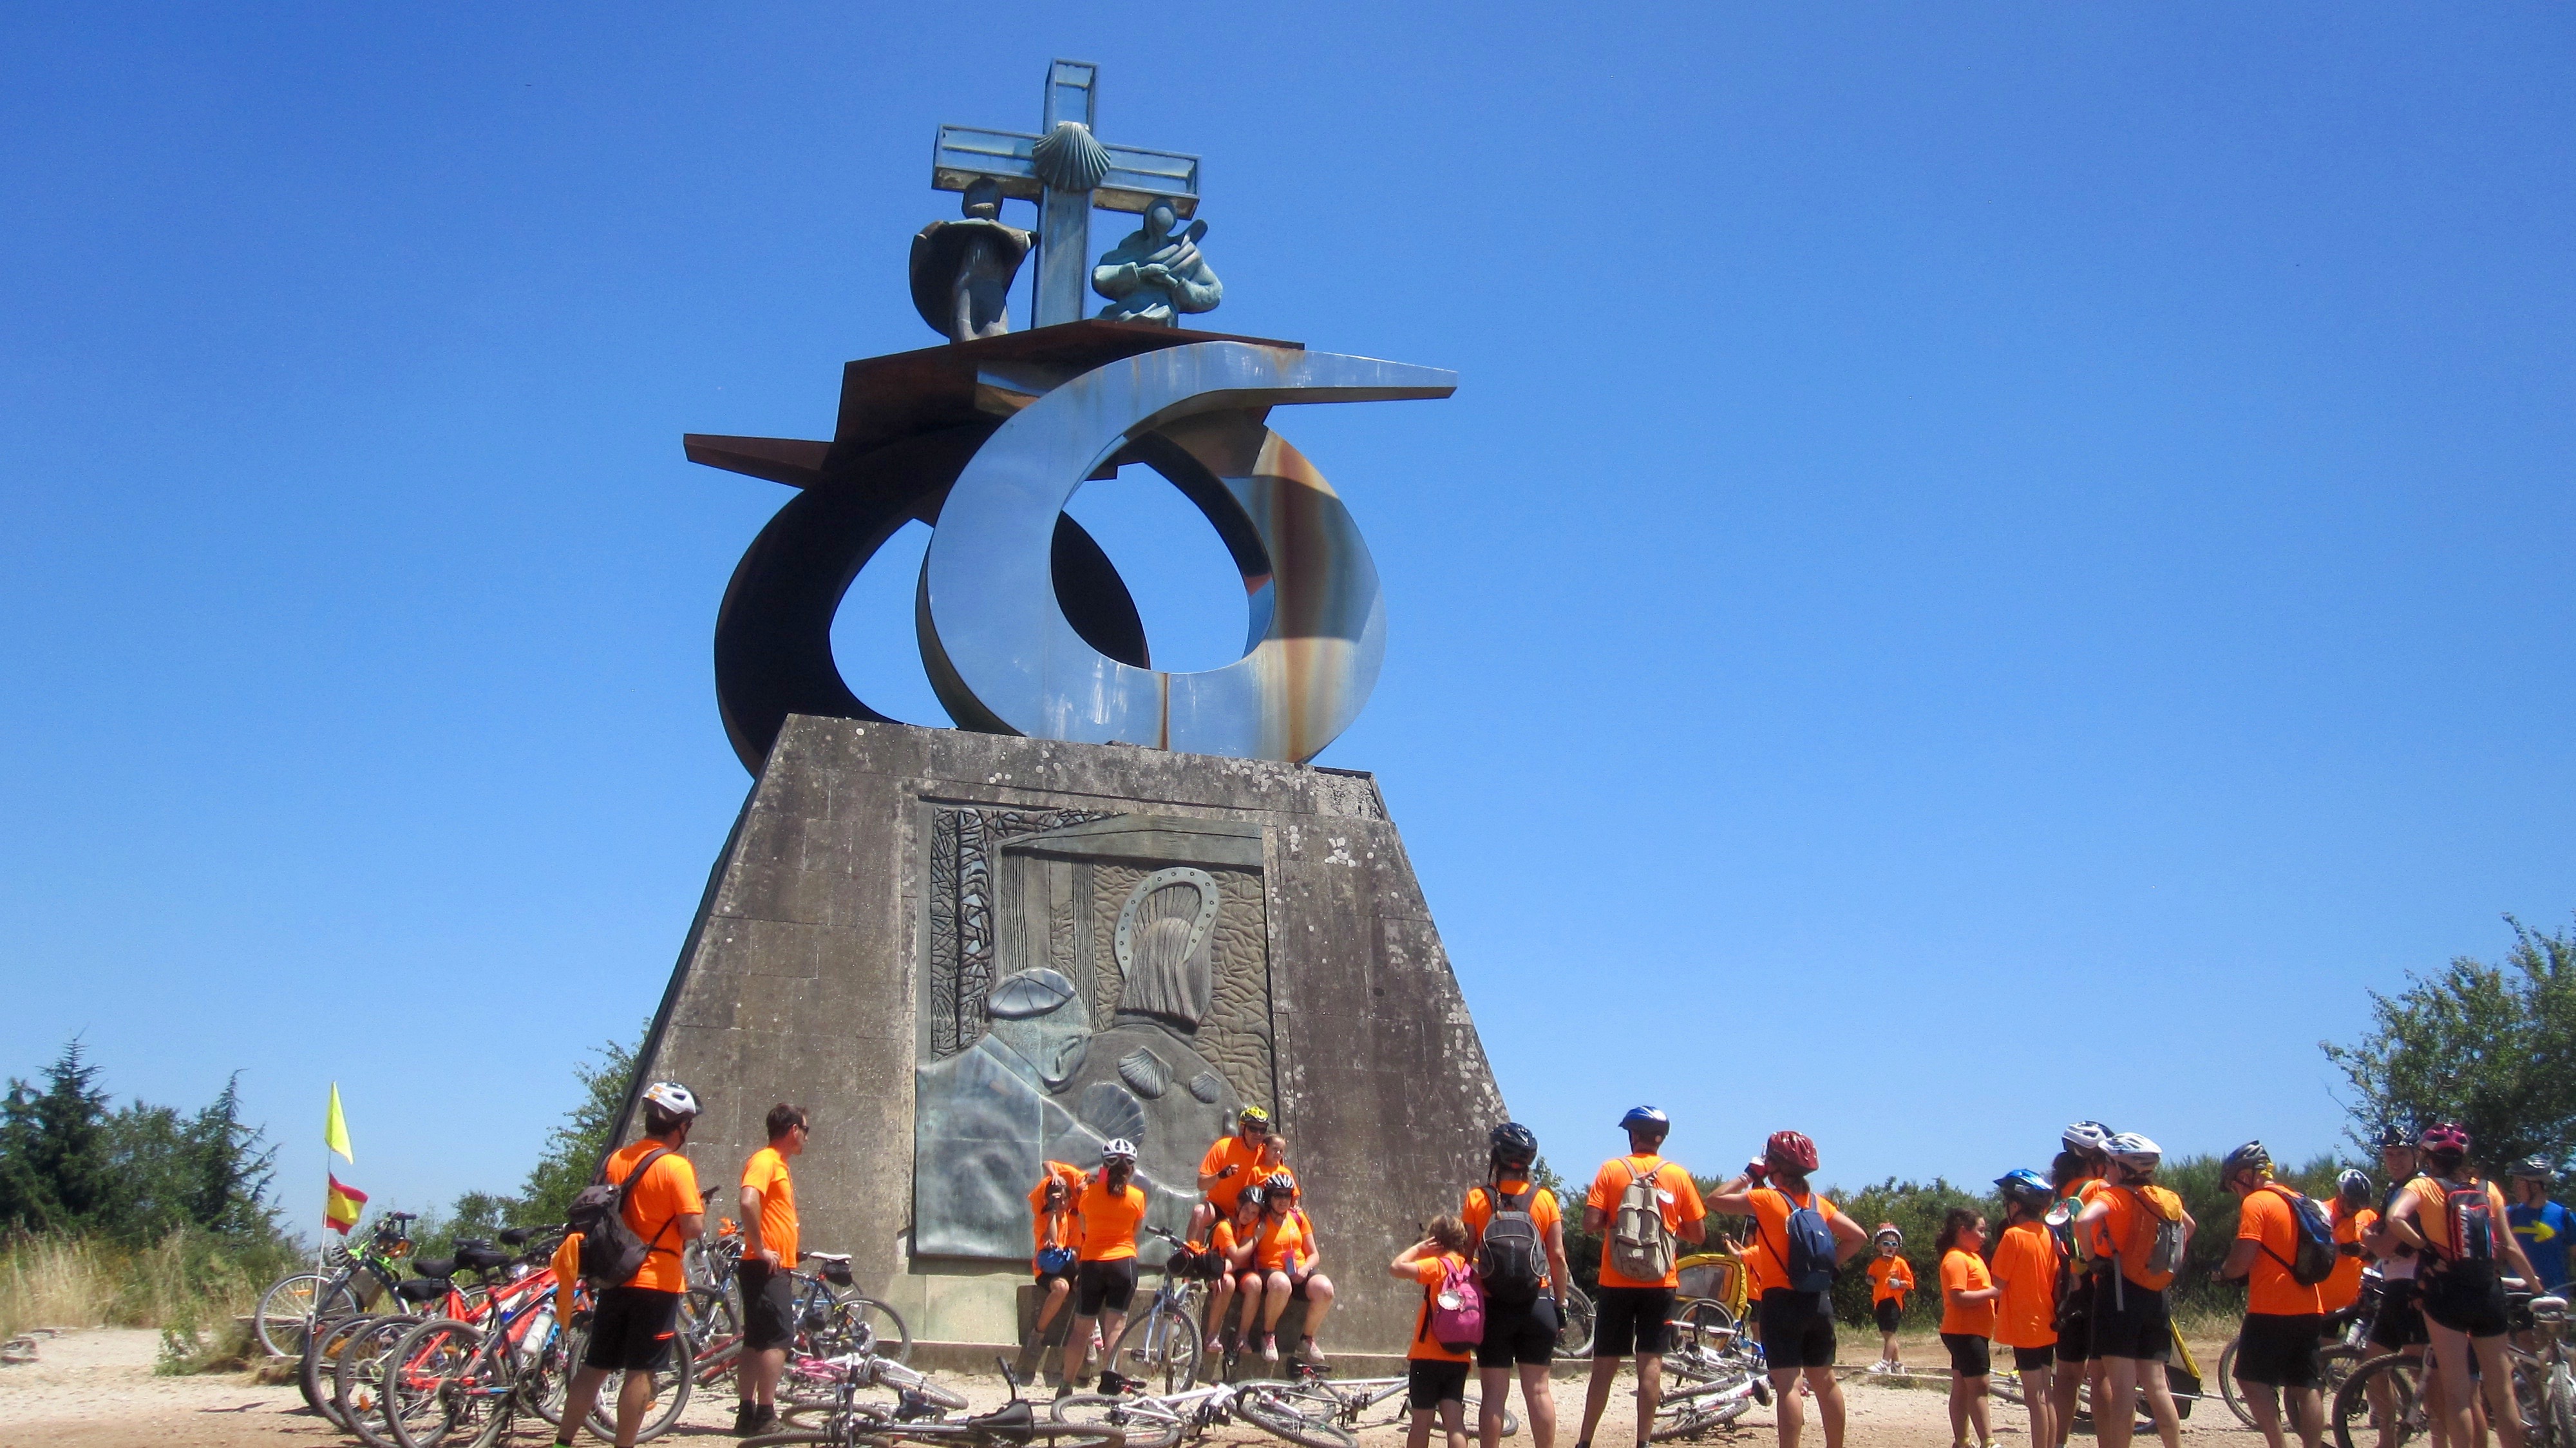 Modern religious sculpture on Monte do Gozo with a group of bikers in front of it